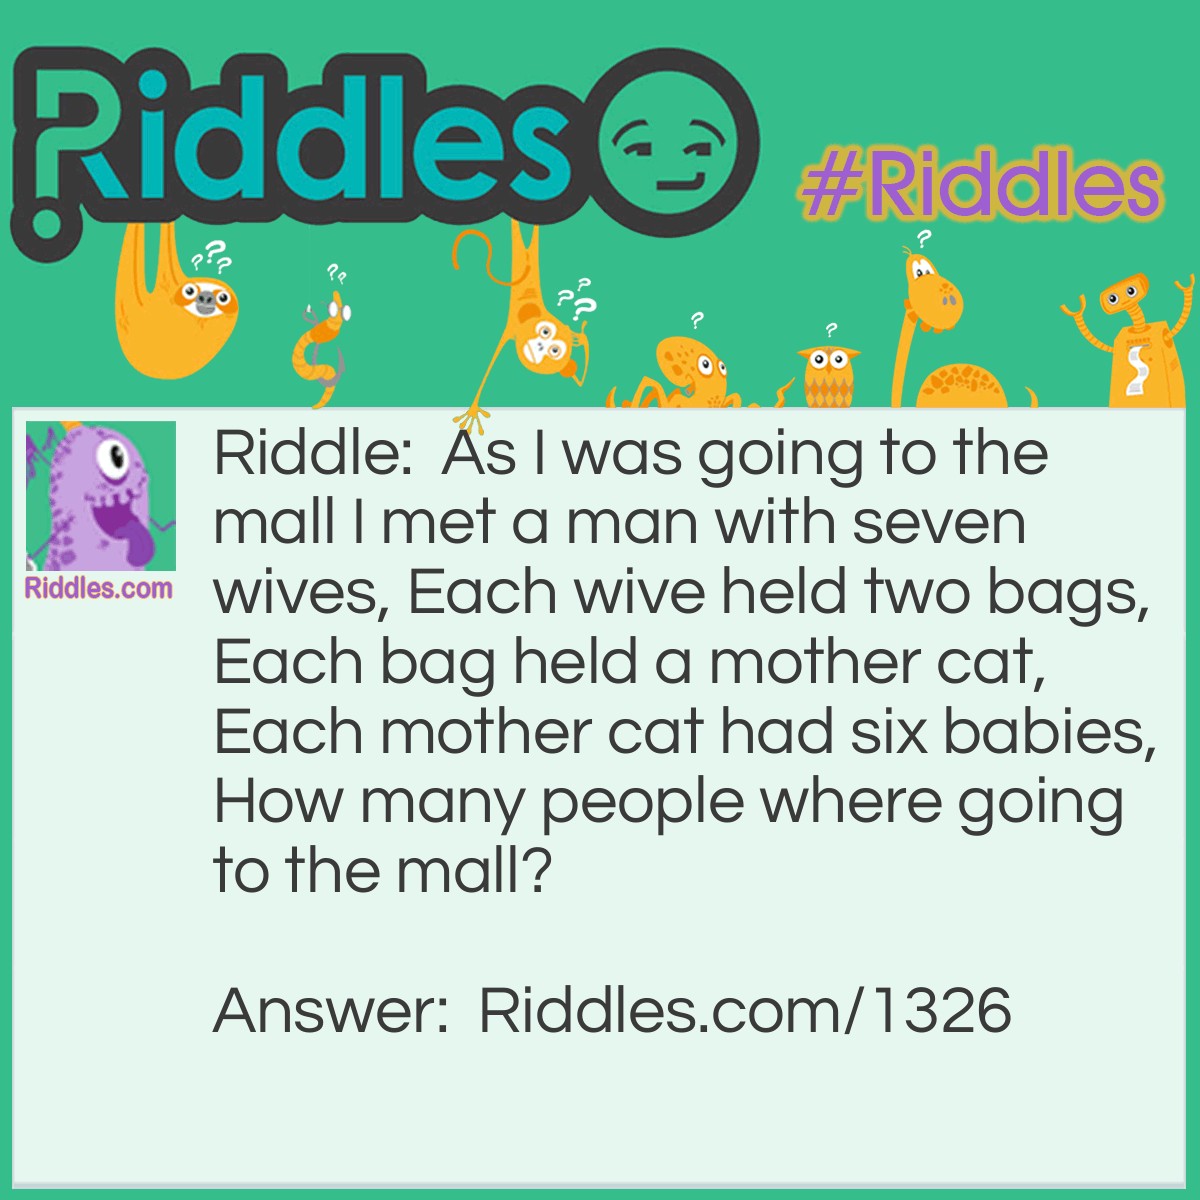 Riddle: As I was going to the mall I met a man with seven wives, Each wive held two bags, Each bag held a mother cat, Each mother cat had six babies,
How many people where going to the mall? Answer: One! As I was going to the mall I met a man...